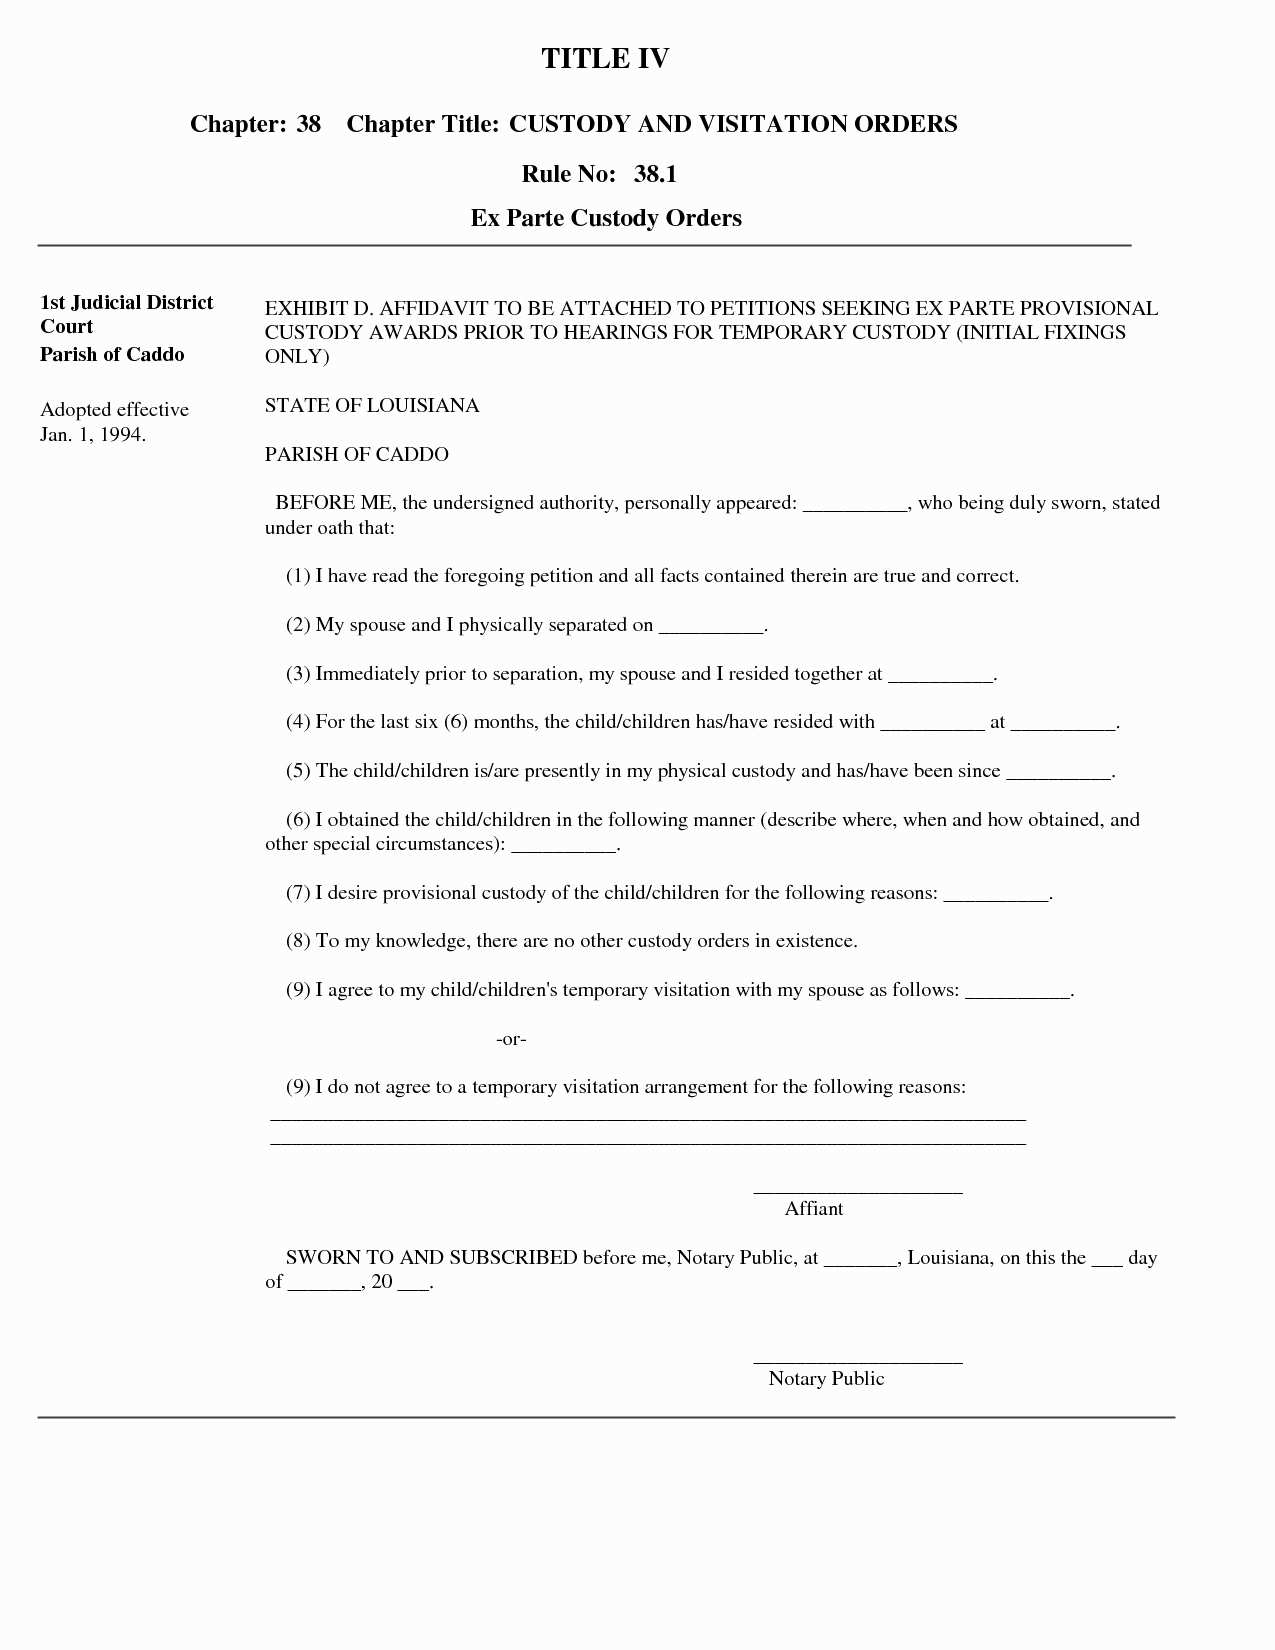 Temporary Child Custody Agreement Form 97998 Awesome Free Printable - Free Printable Child Custody Papers